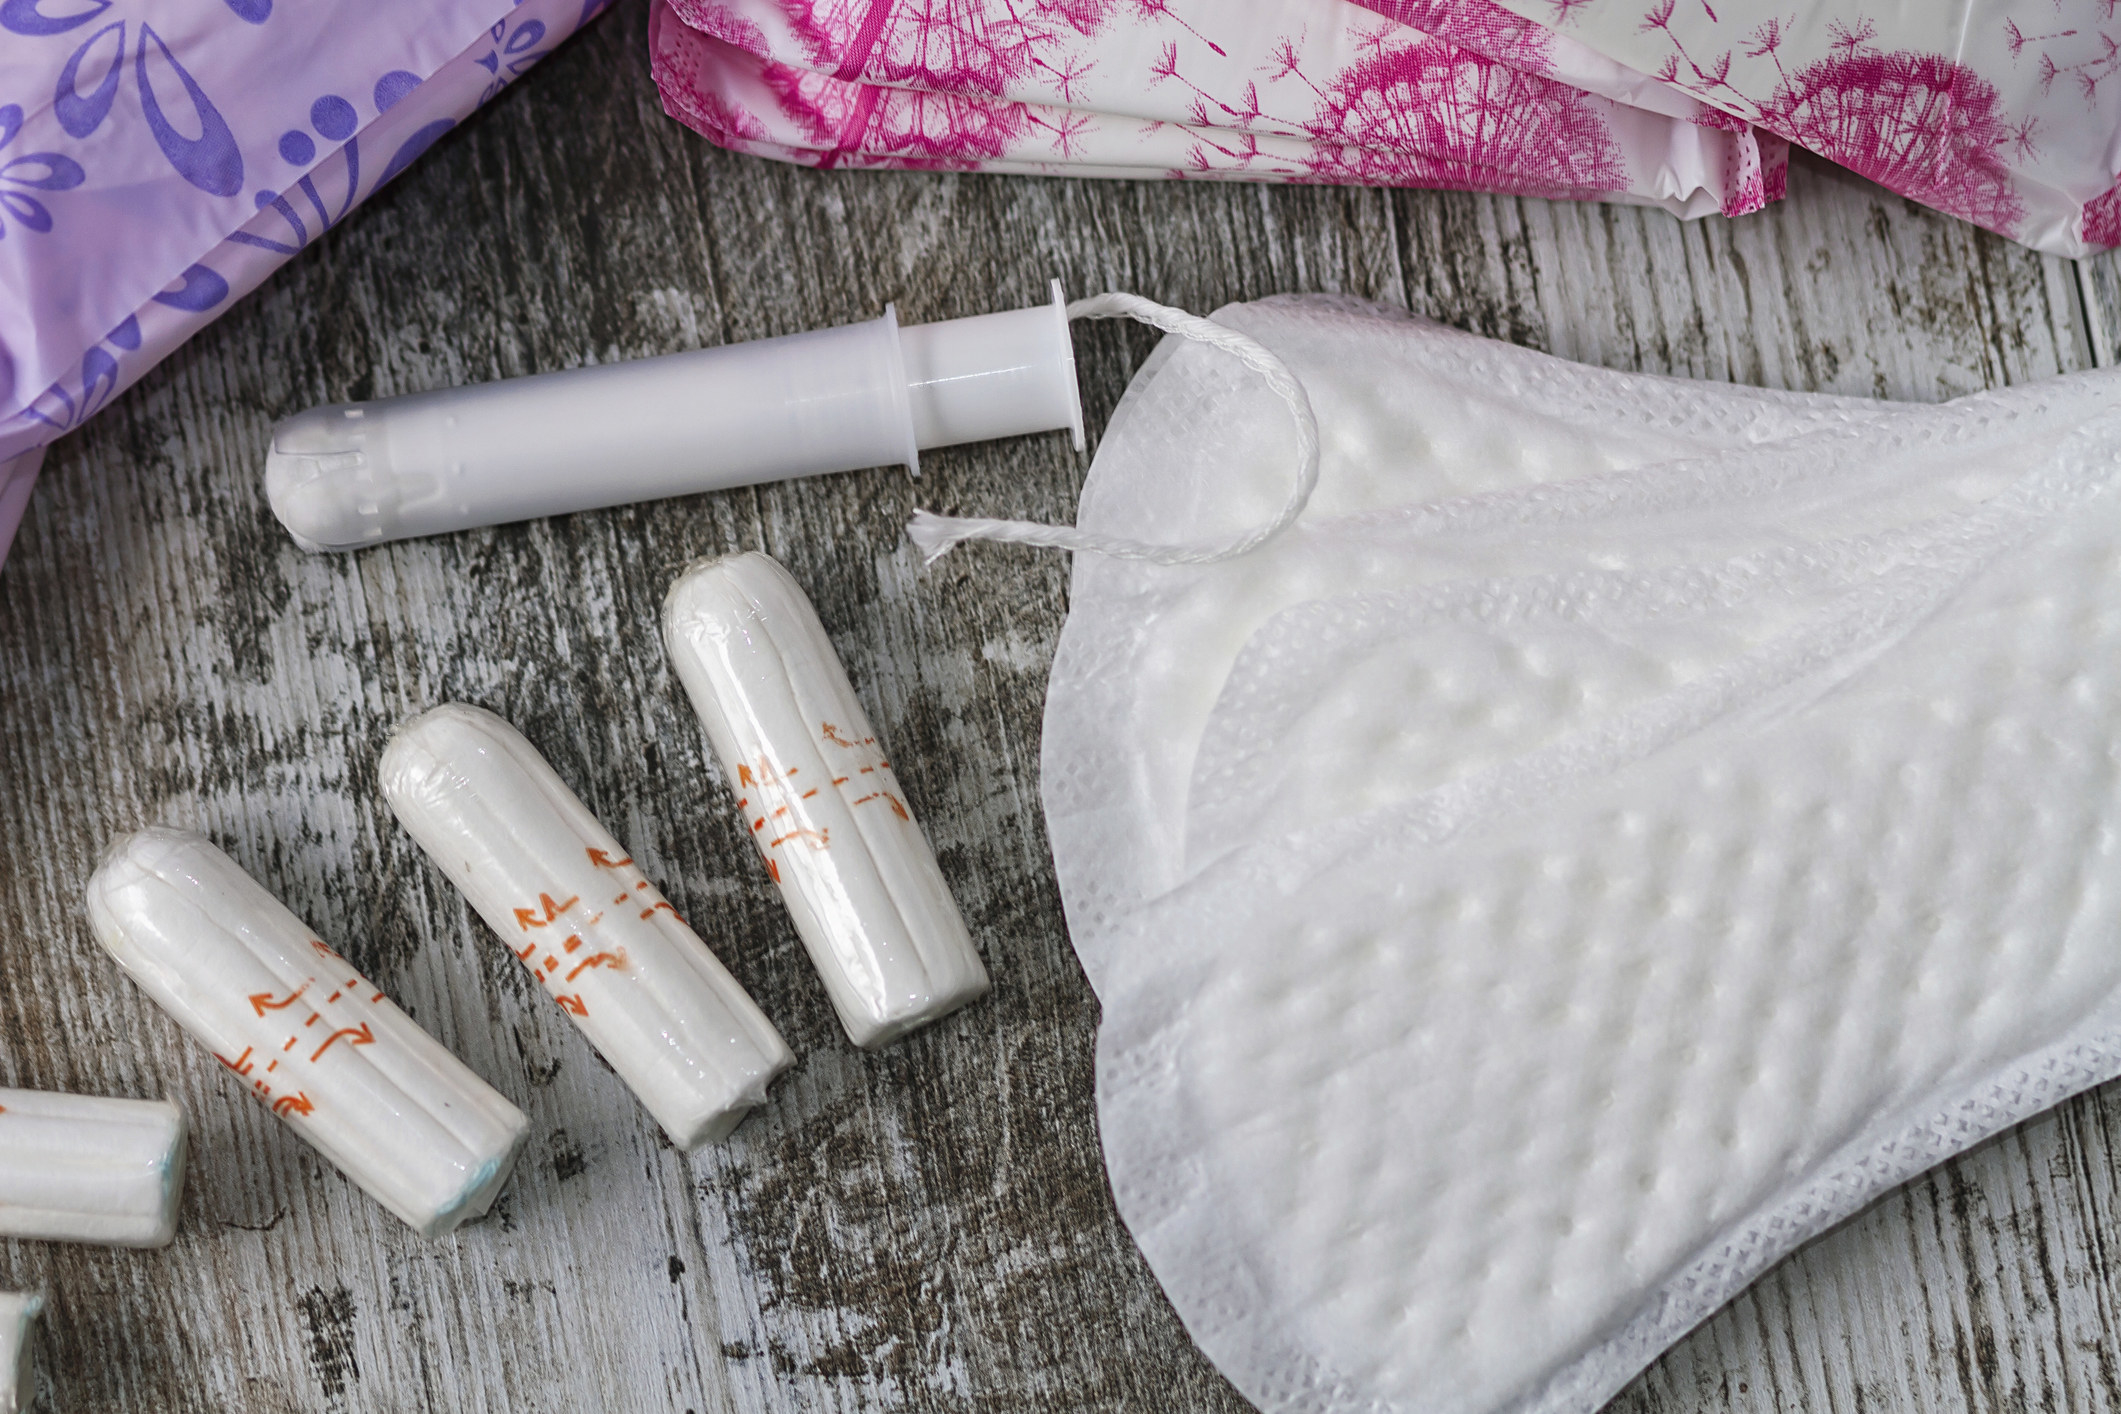 A collection of period products, including pads and tampons